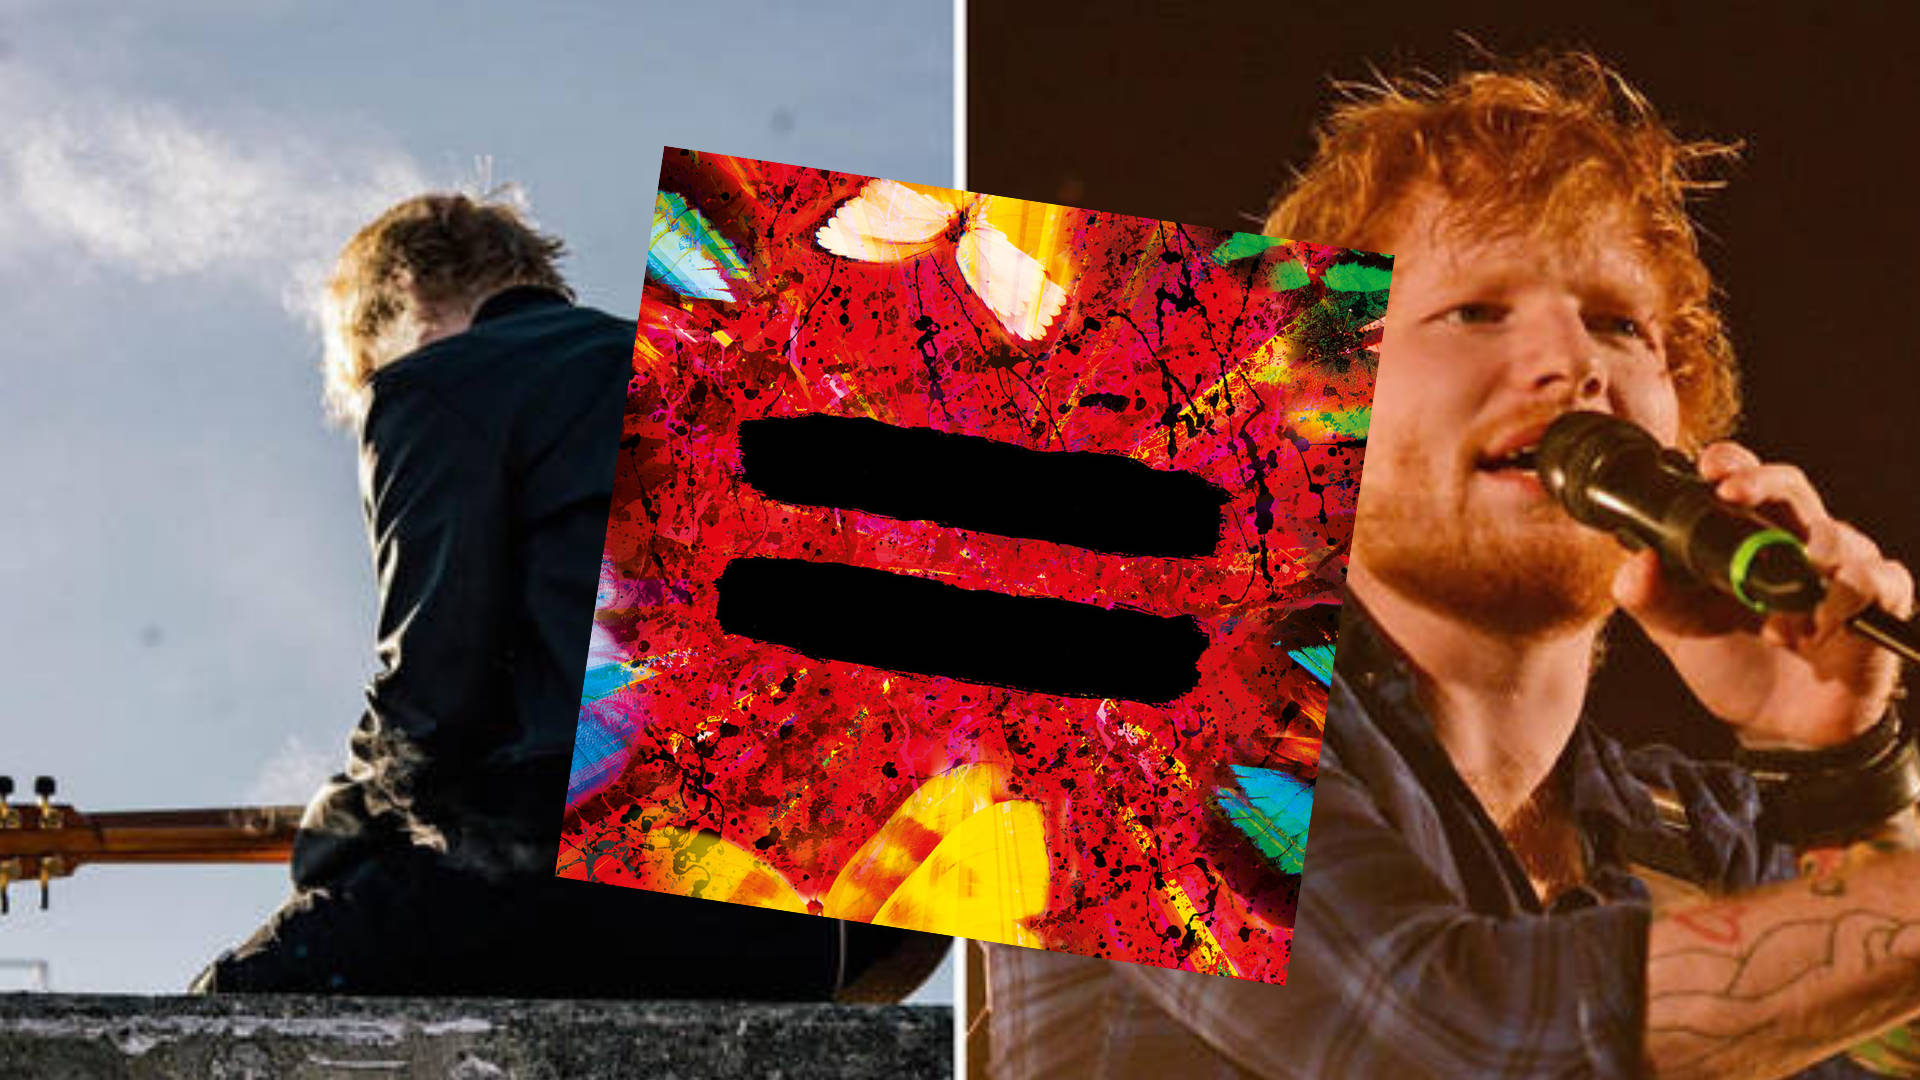 Ed Sheeran's new album 'Equals' for 2021: Release date, title, tracklist and latest news